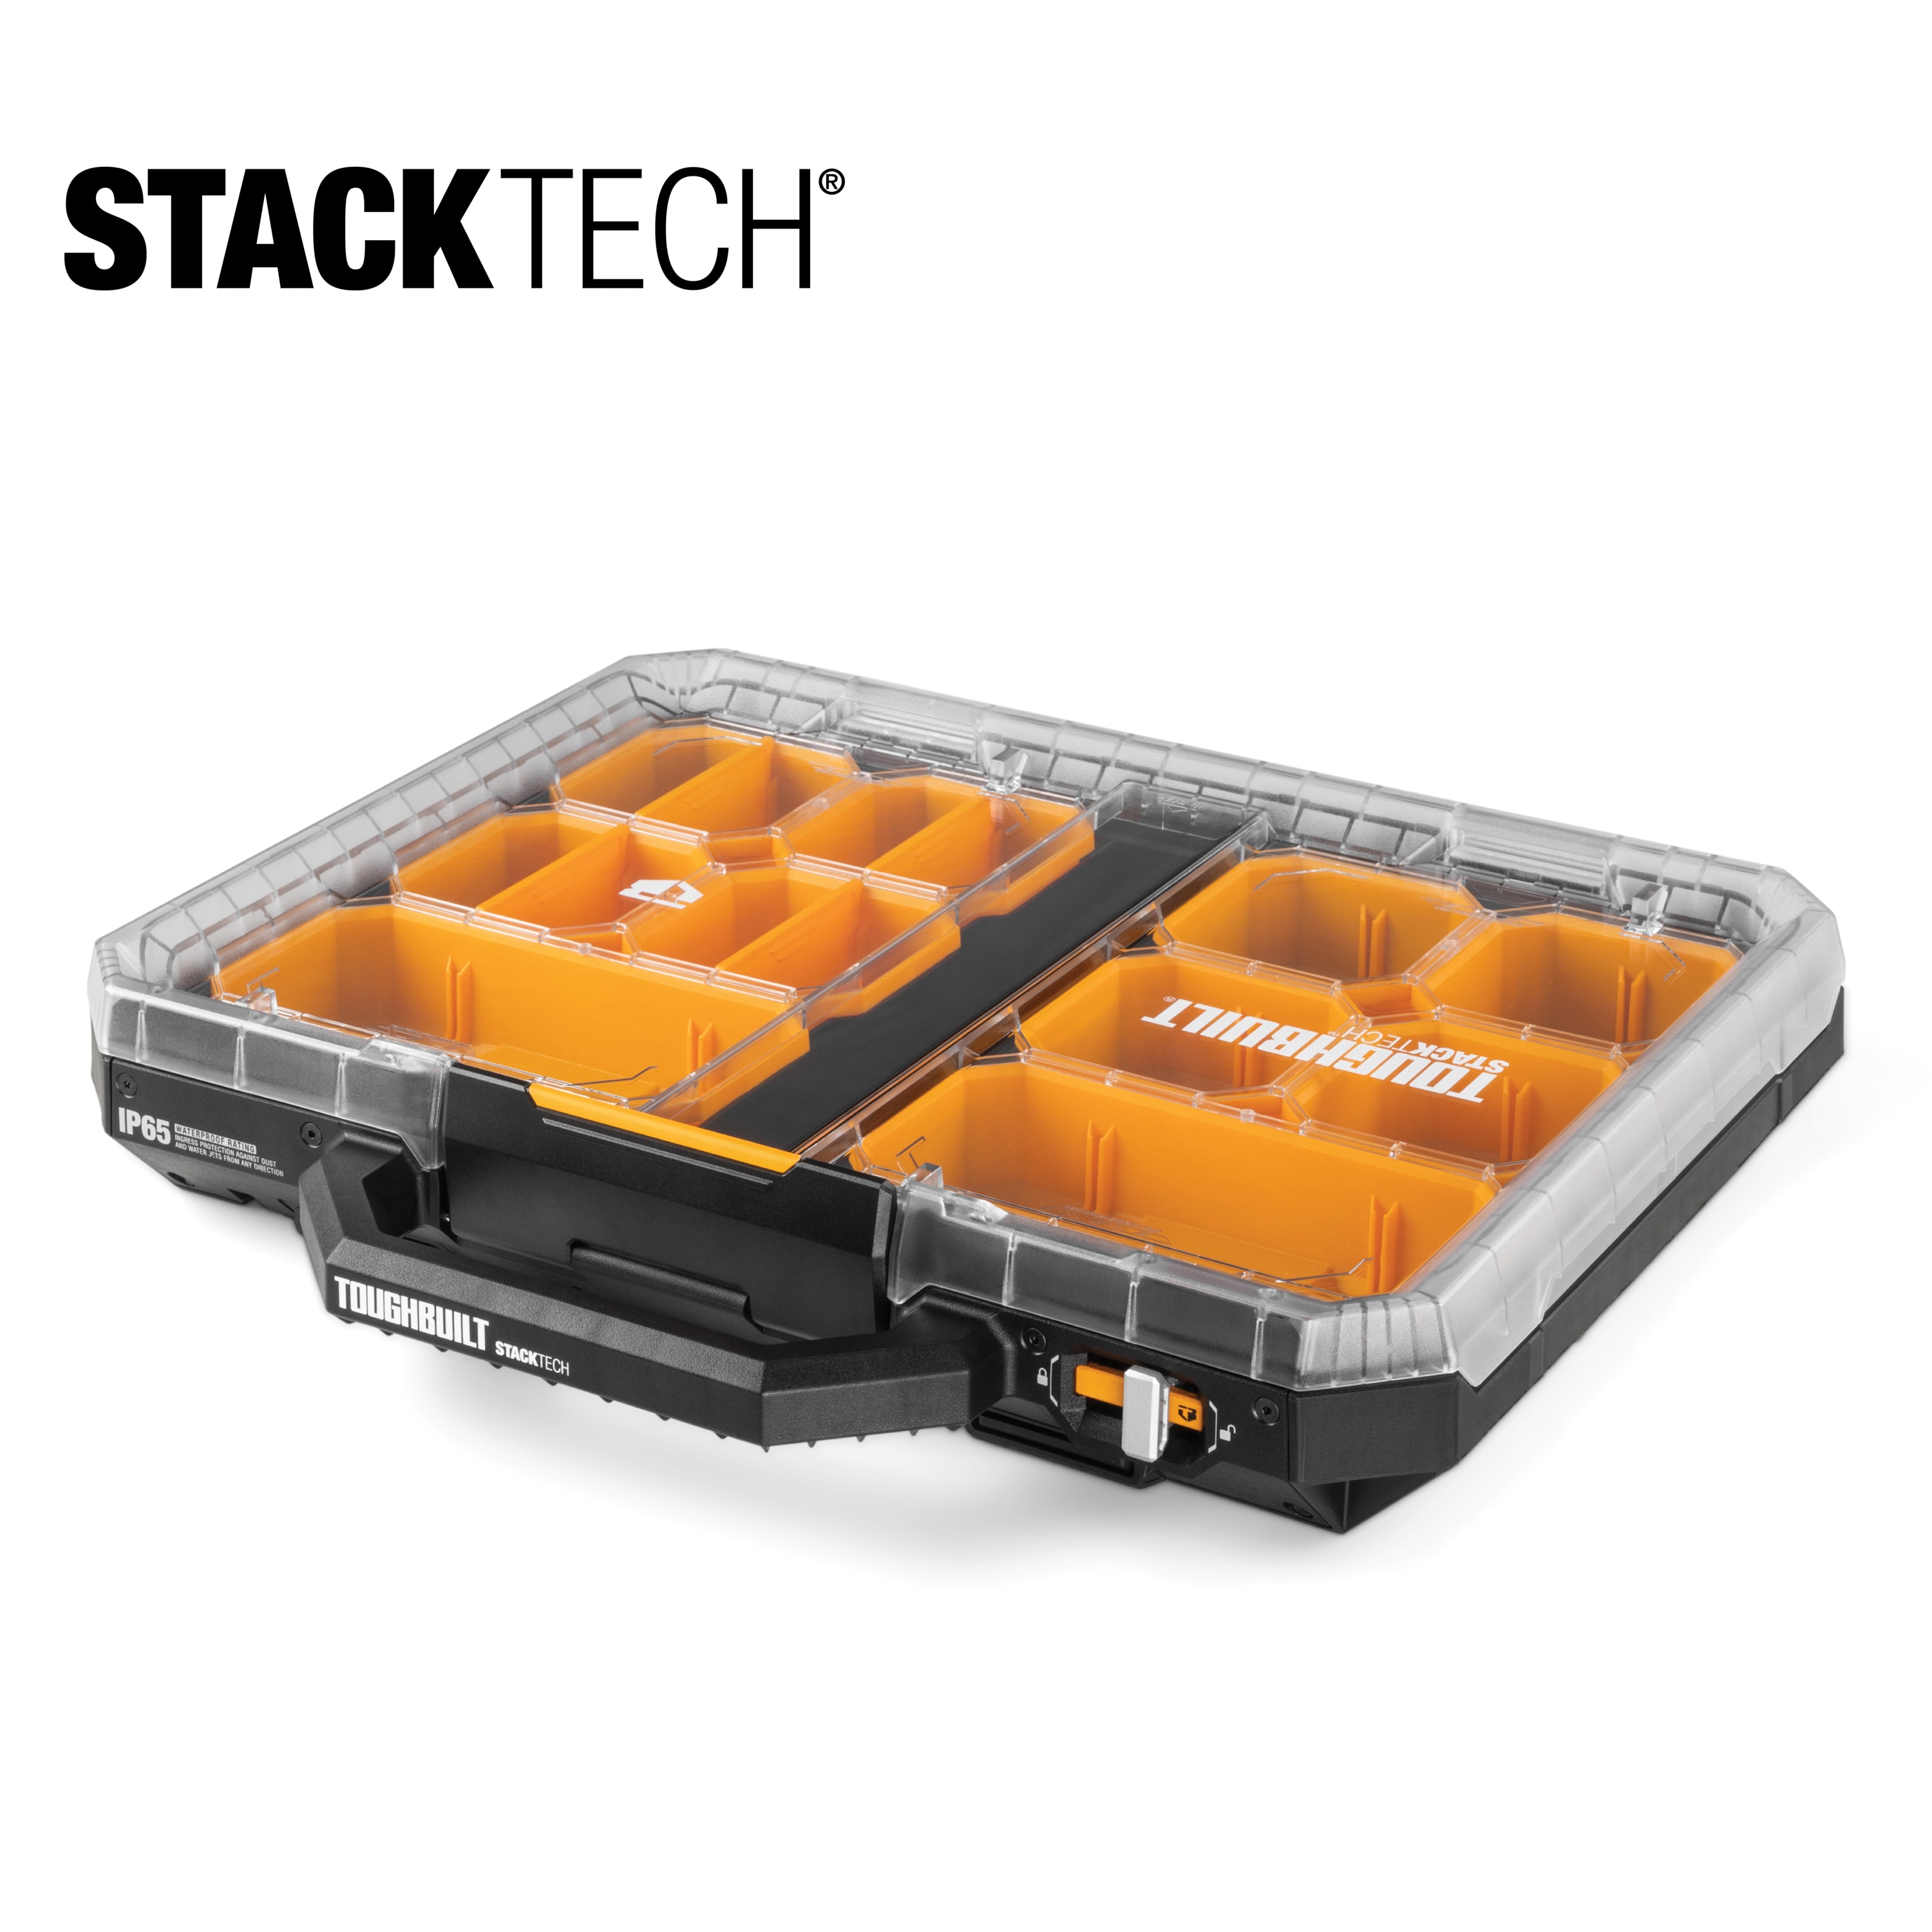 TOUGHBUILT STACKTECH Low-Profile 22-Compartment Plastic Small